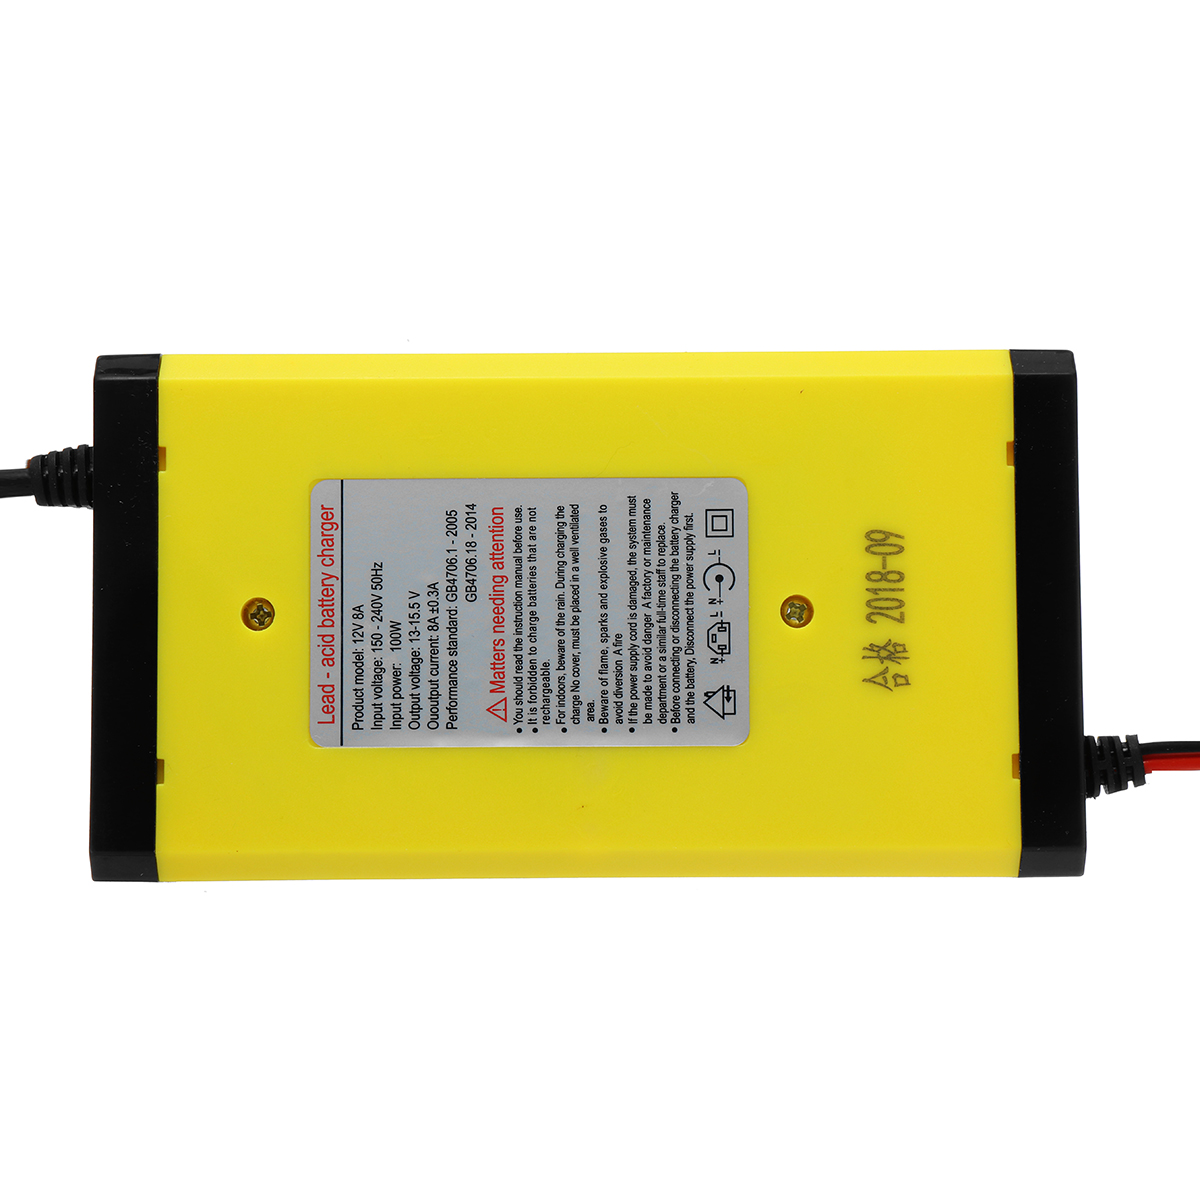 DC-12V-8A-Pulse-Repair-Battery-Charger-For-Car-Motorcycle-AGM-GEL-WET-Lead-Acid-Battery-LCD-1369648-5